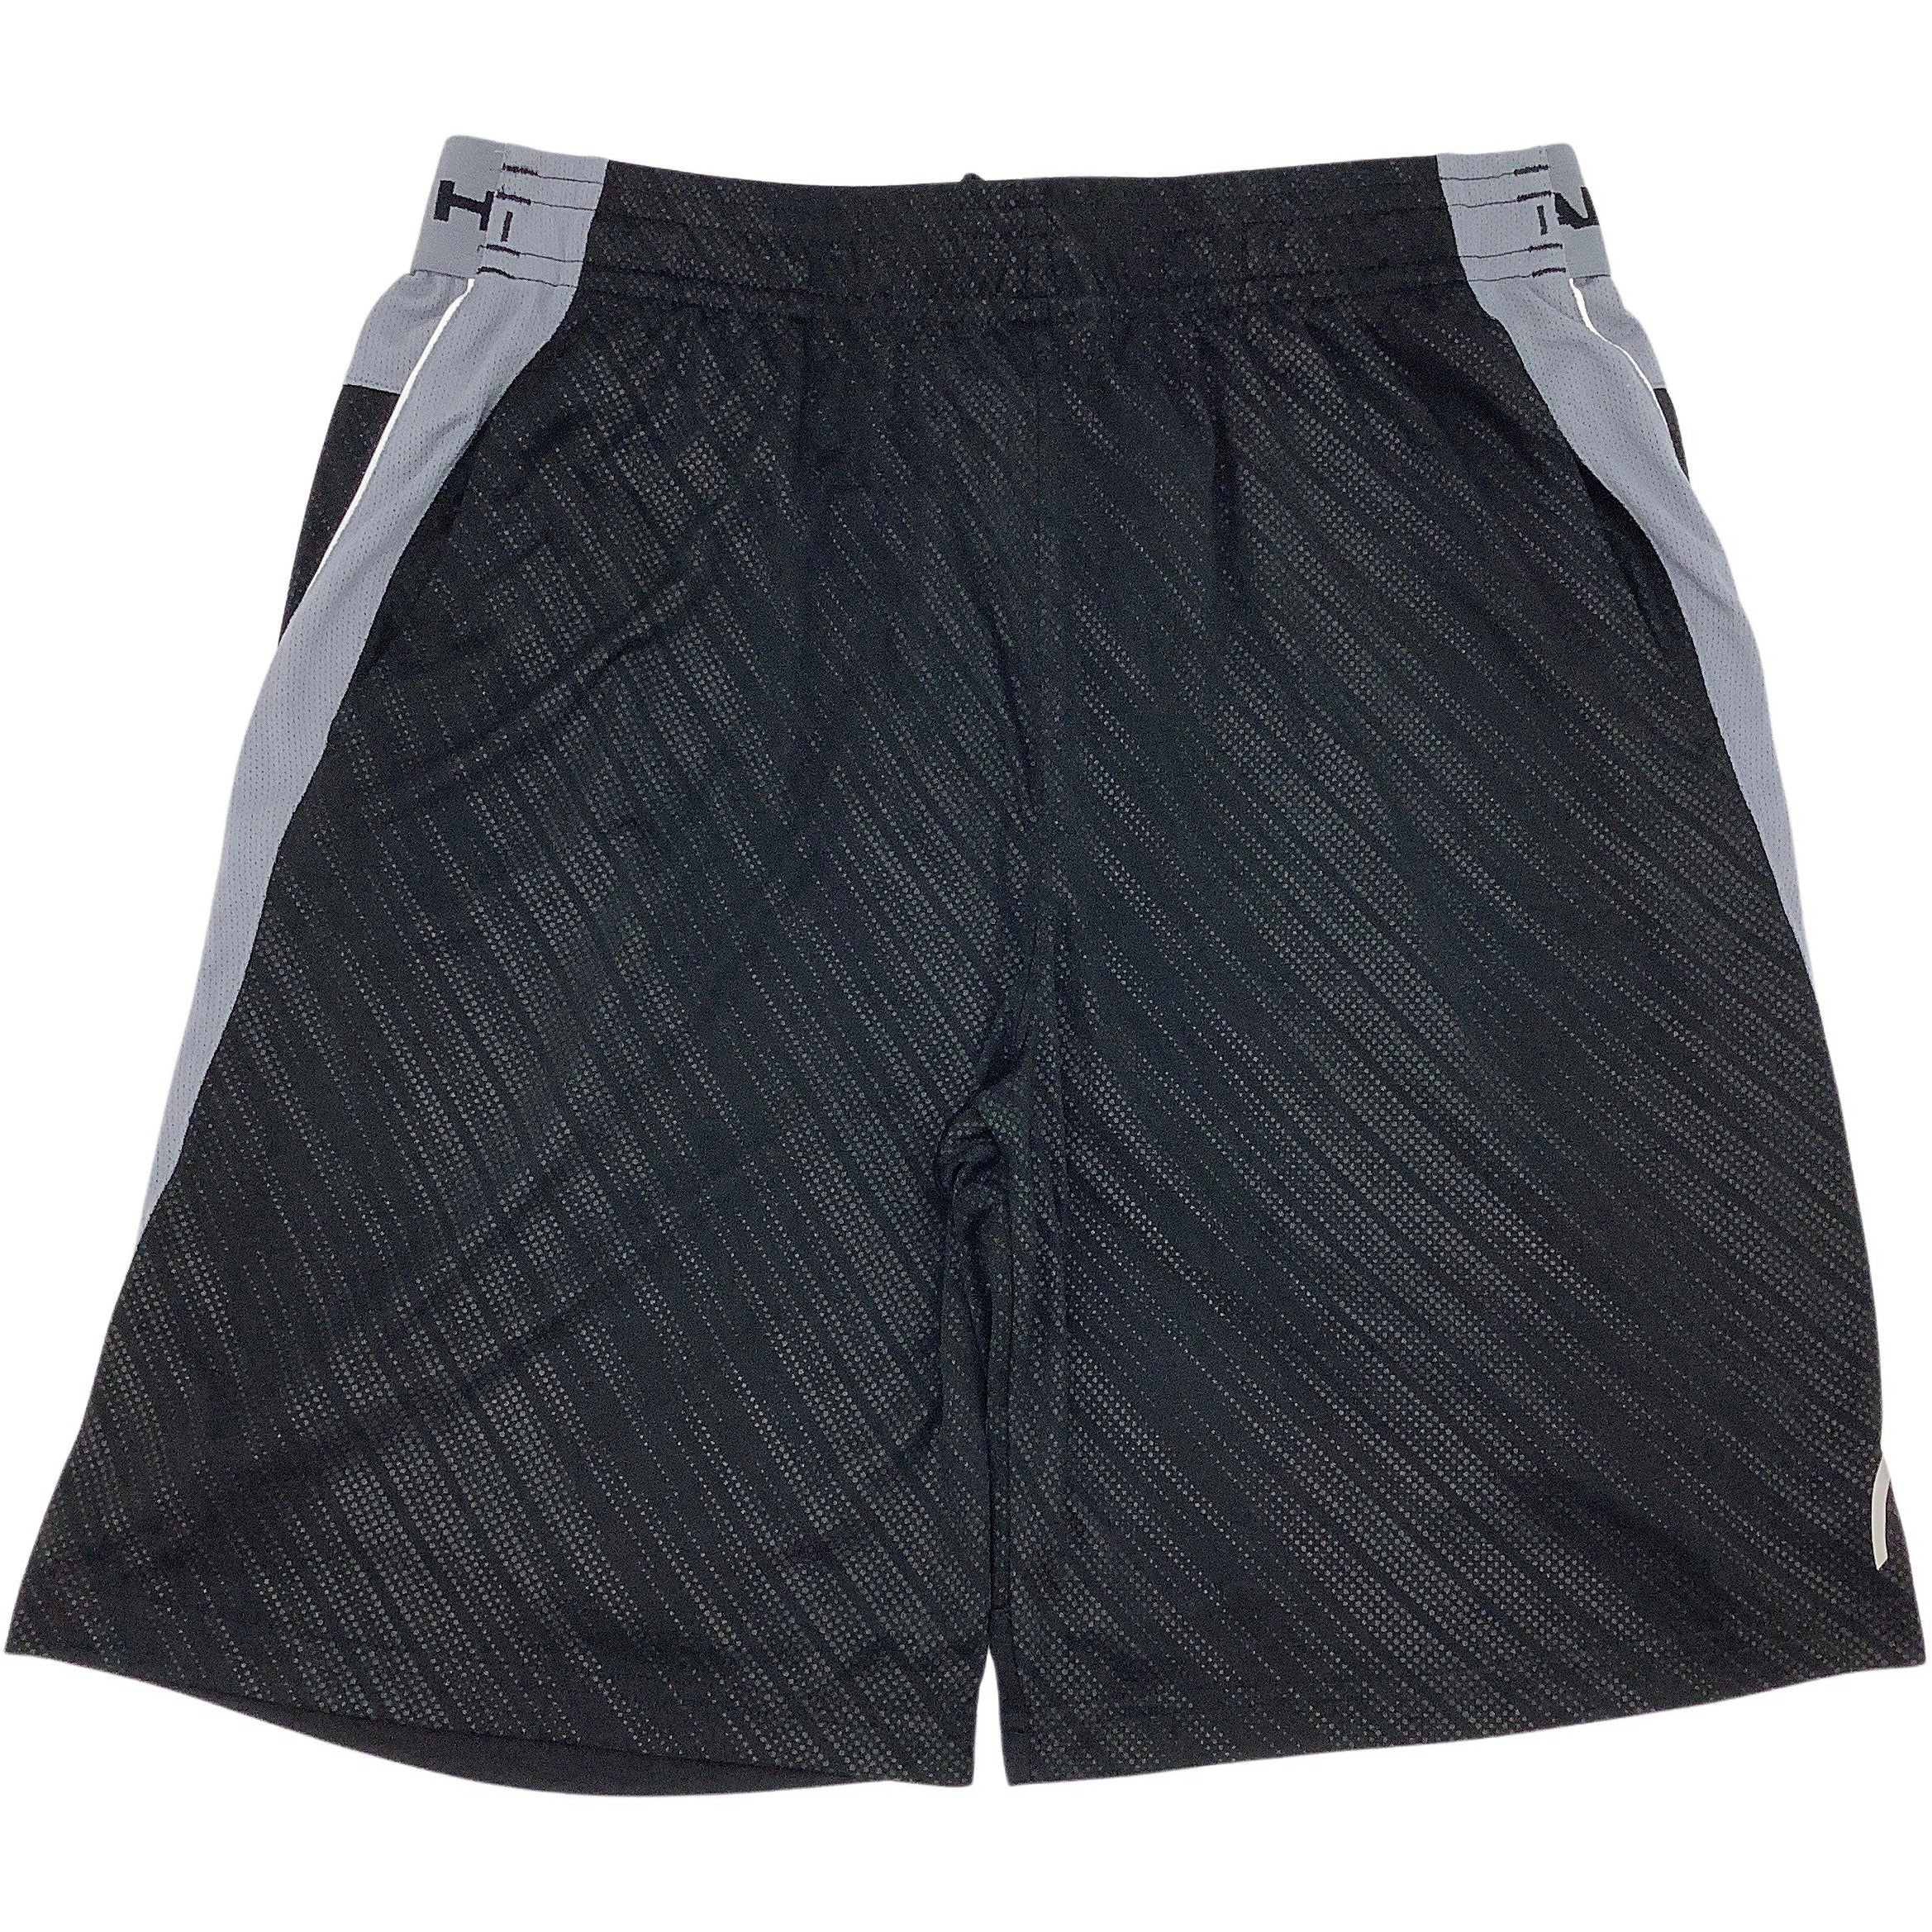 Head Men's Athletic Shorts: Grey and Black: Size L (no tags)